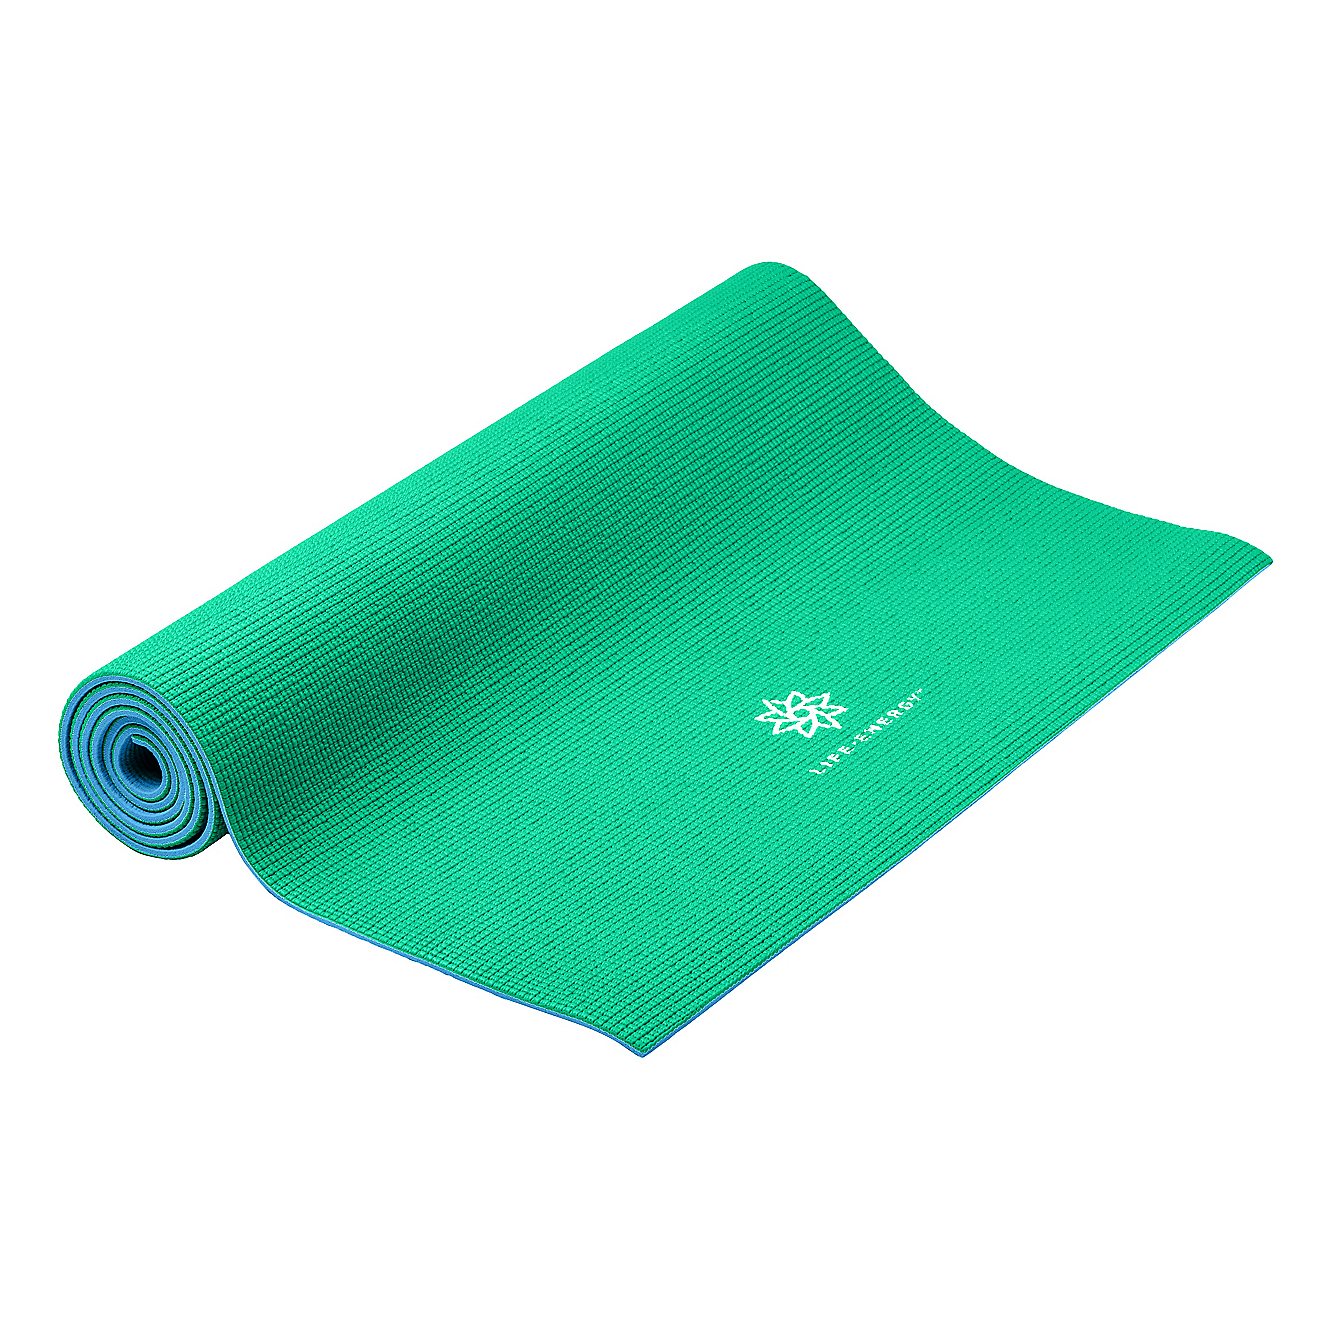 Life Energy 6mm Reversible Double Sided Yoga Mat - Emerald                                                                       - view number 1